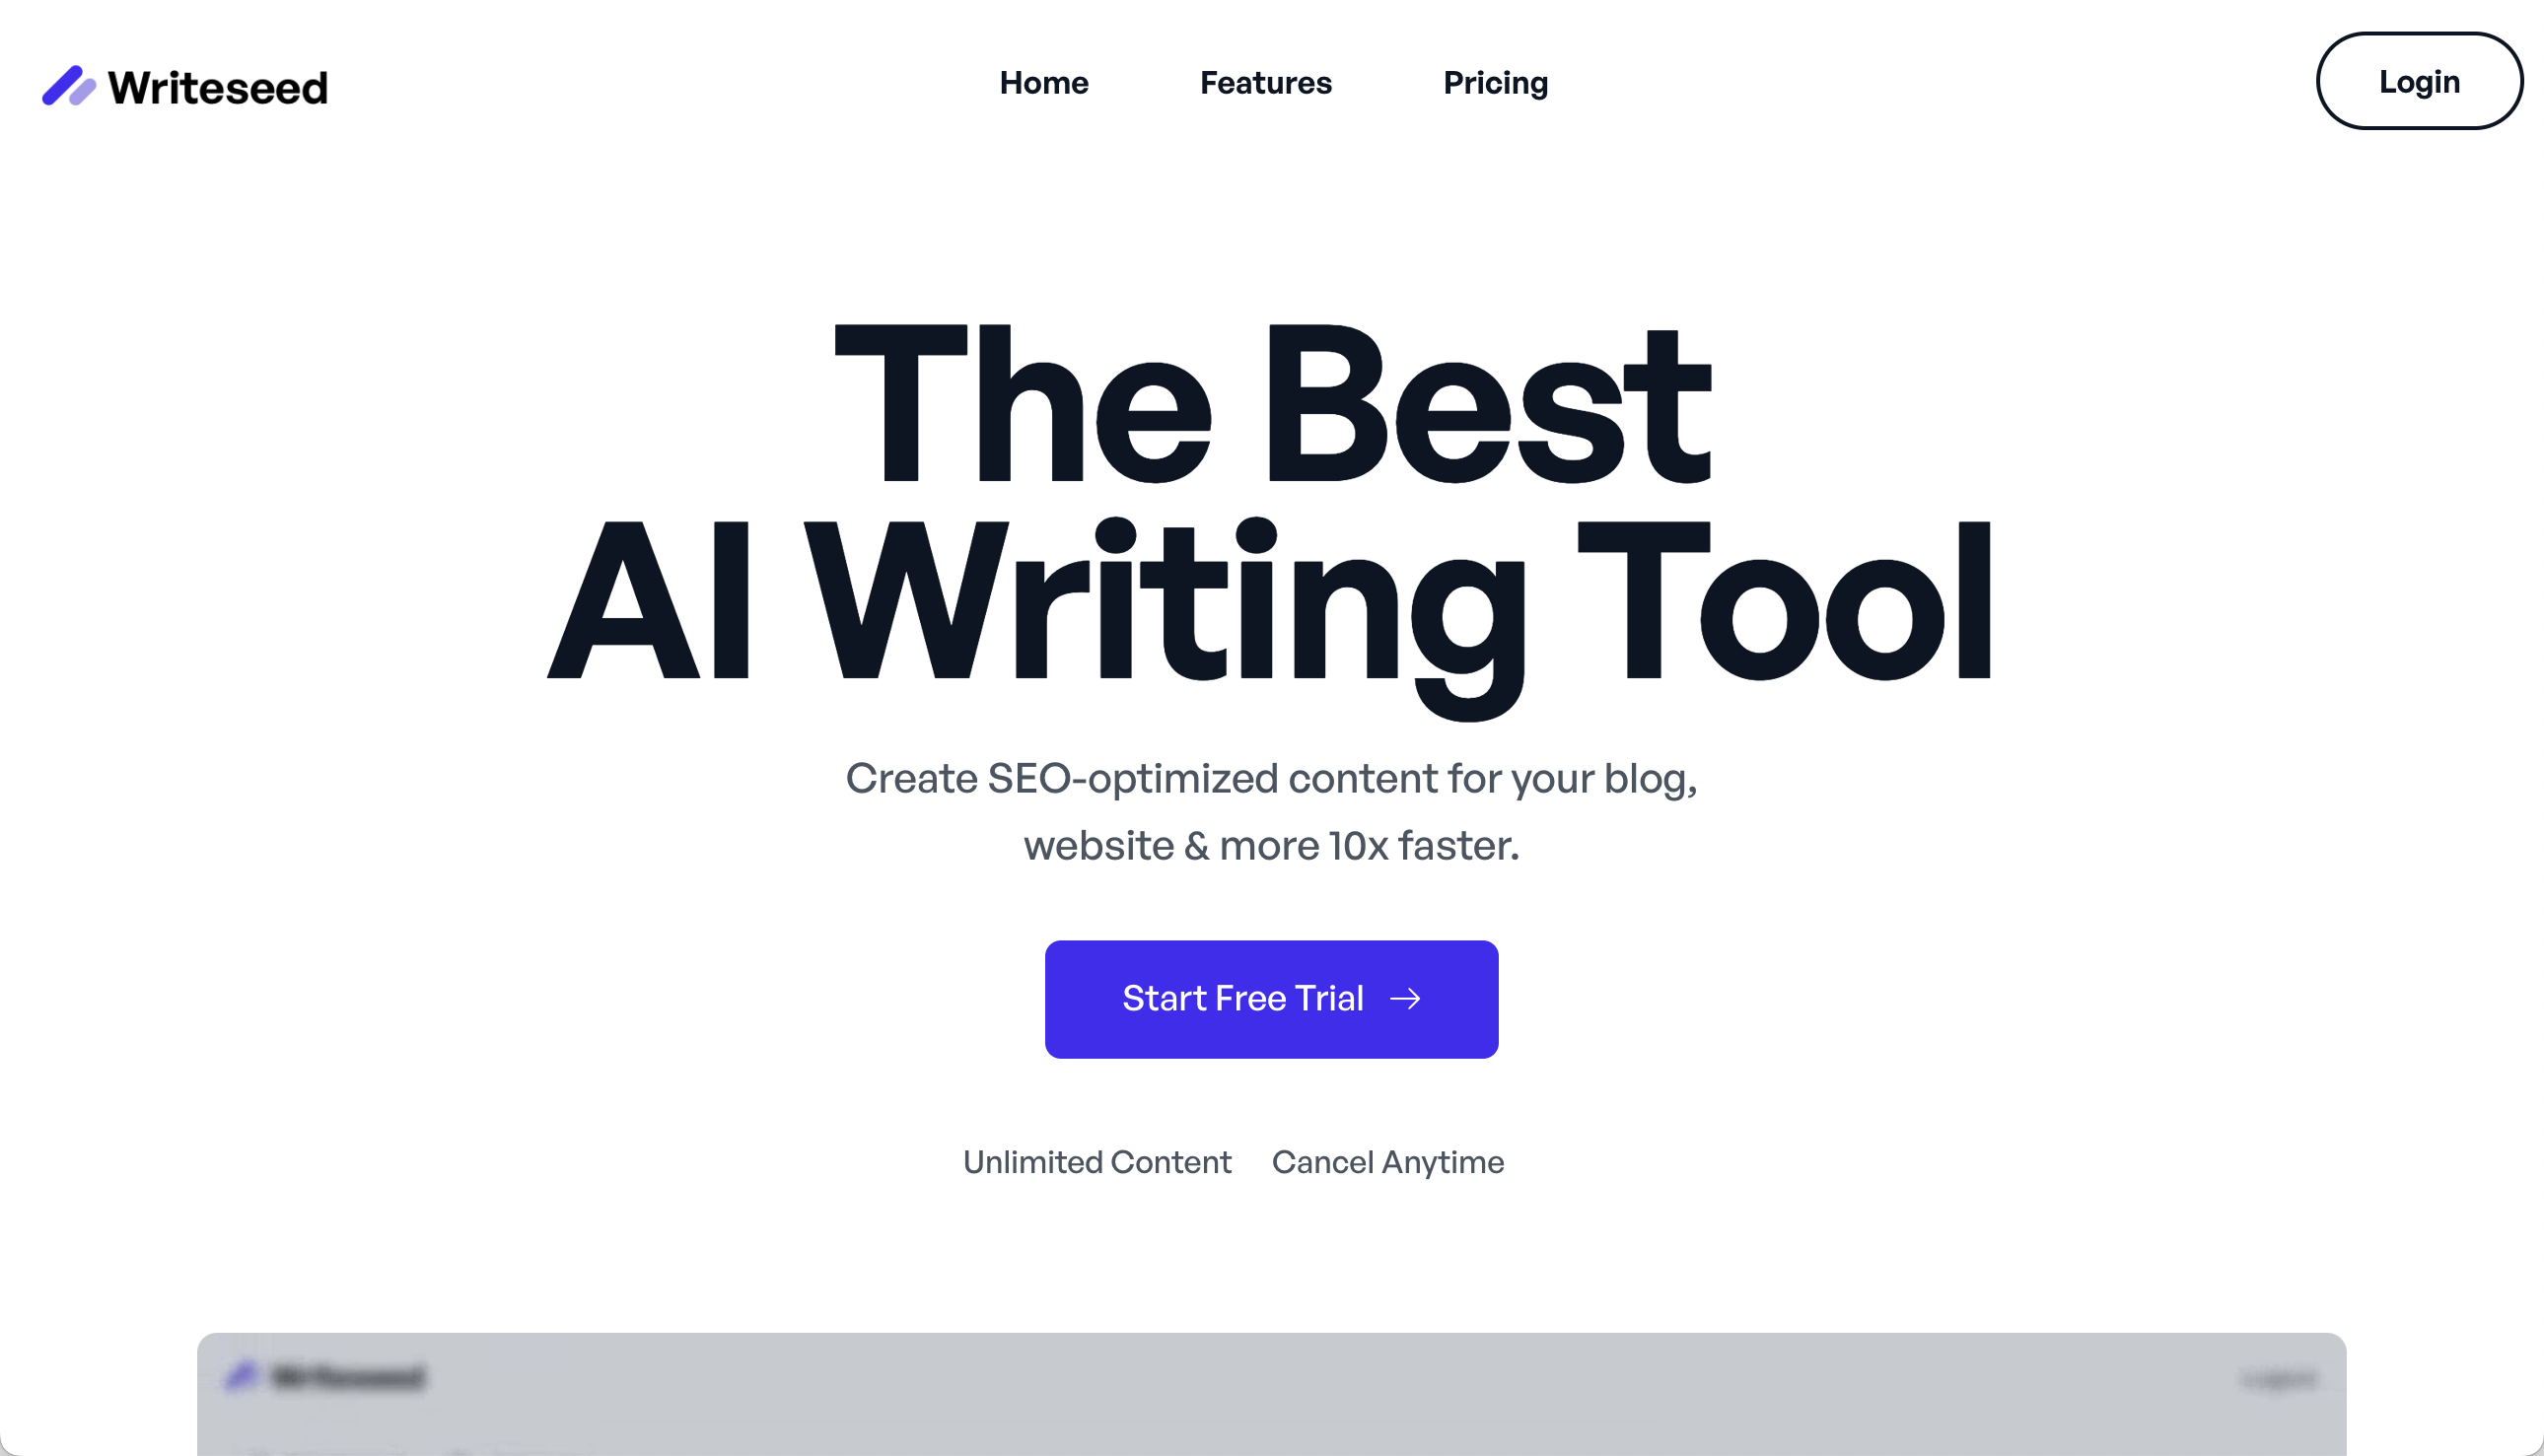 The best AI writing tool